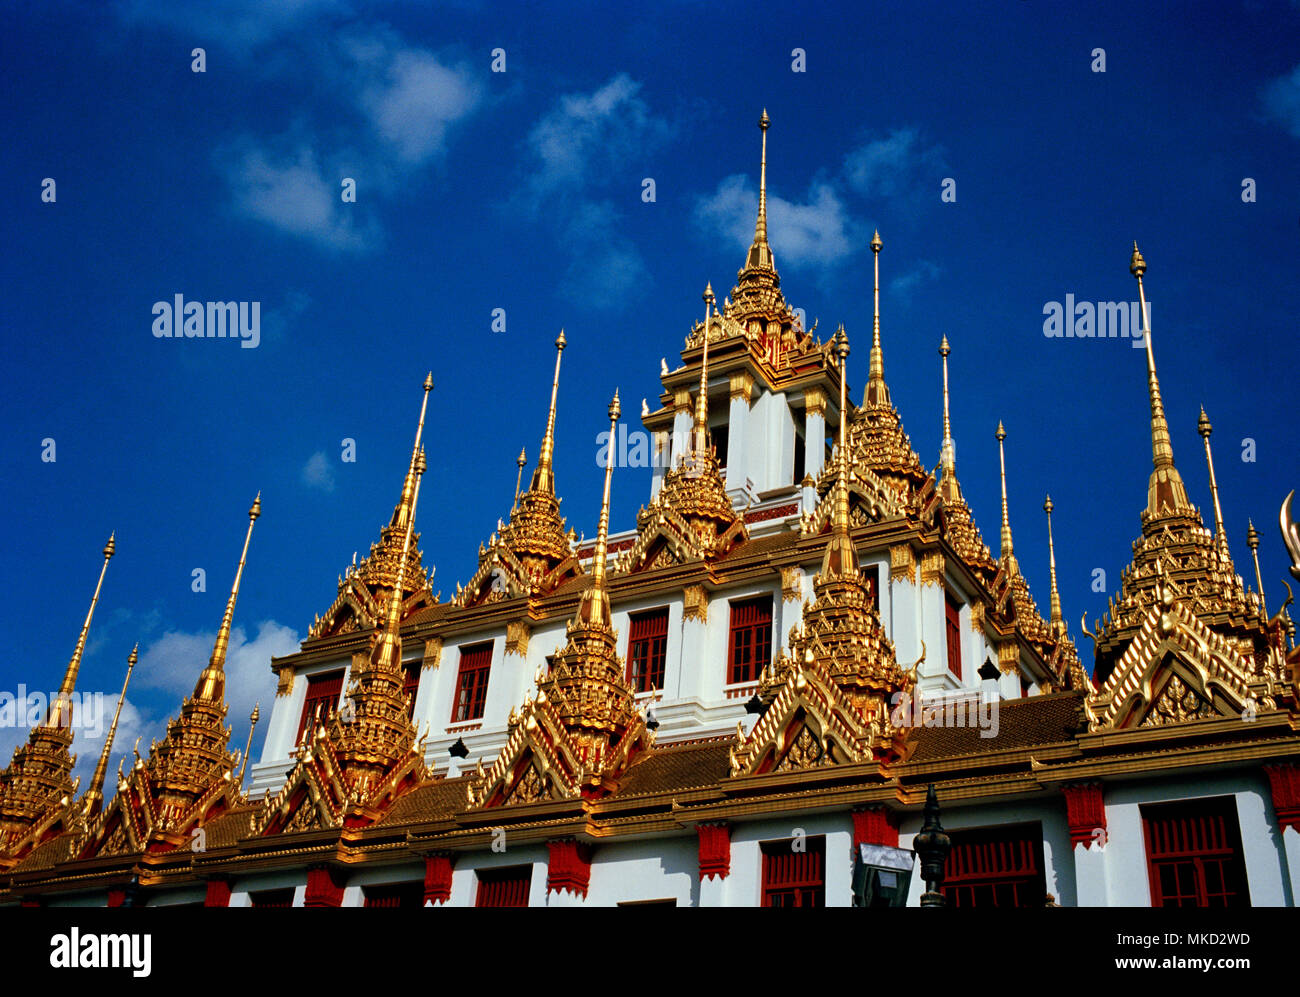 Thai Buddhism - Spires of the Buddhist temple Loha Prasat Metal Castle of Wat Ratchanadda in Bangkok in Thailand in Southeast Asia Far East. Travel Stock Photo